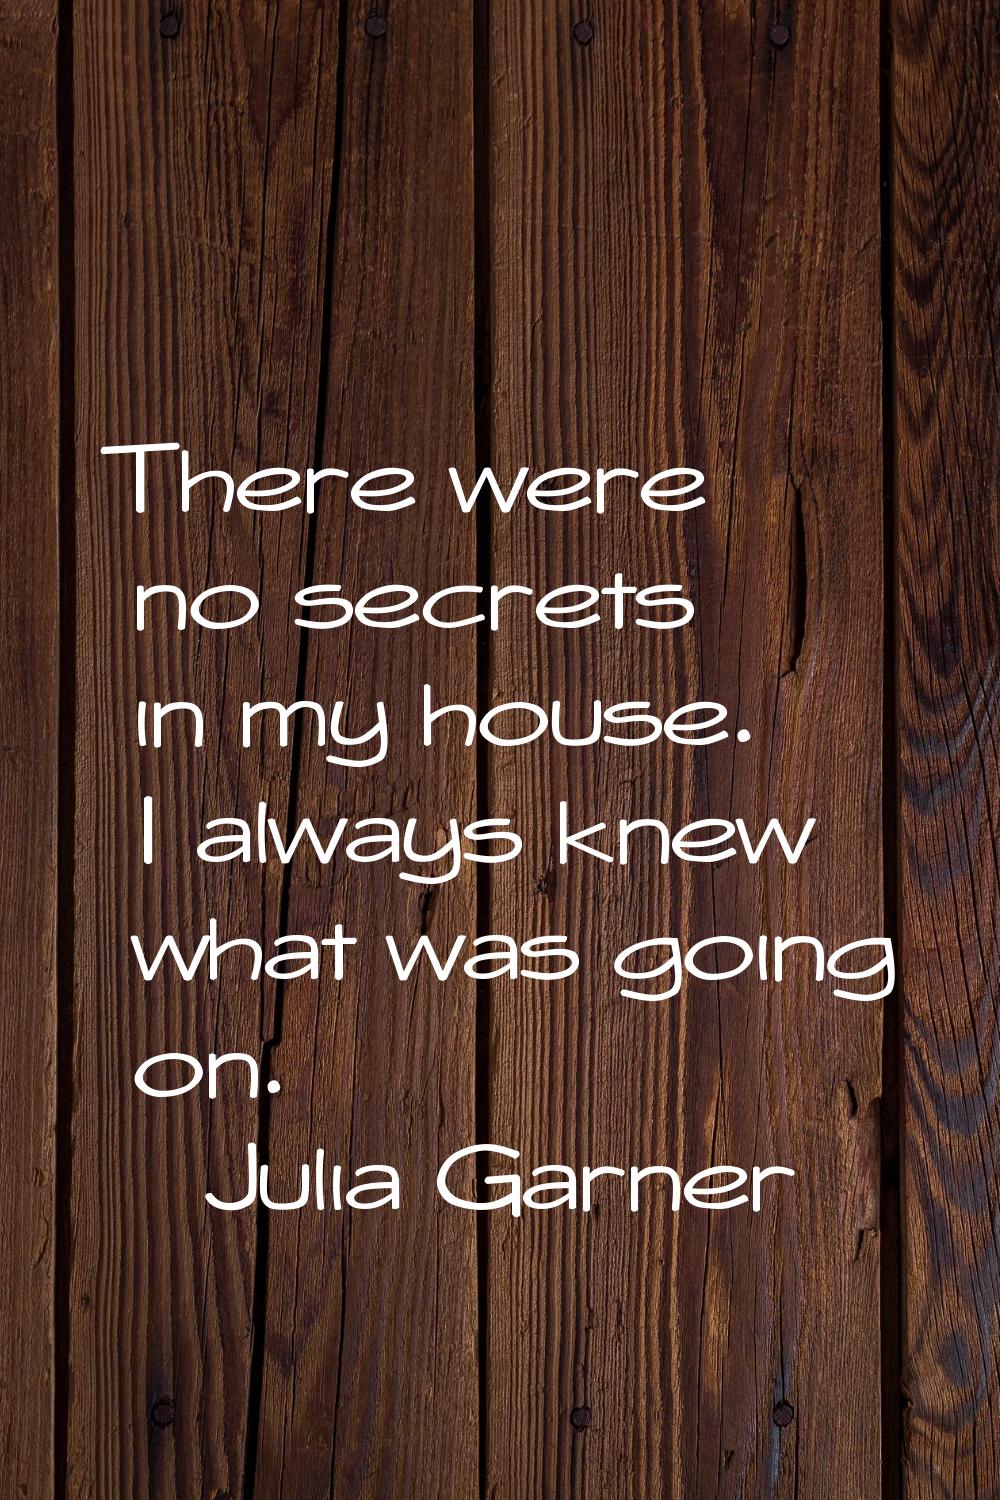 There were no secrets in my house. I always knew what was going on.